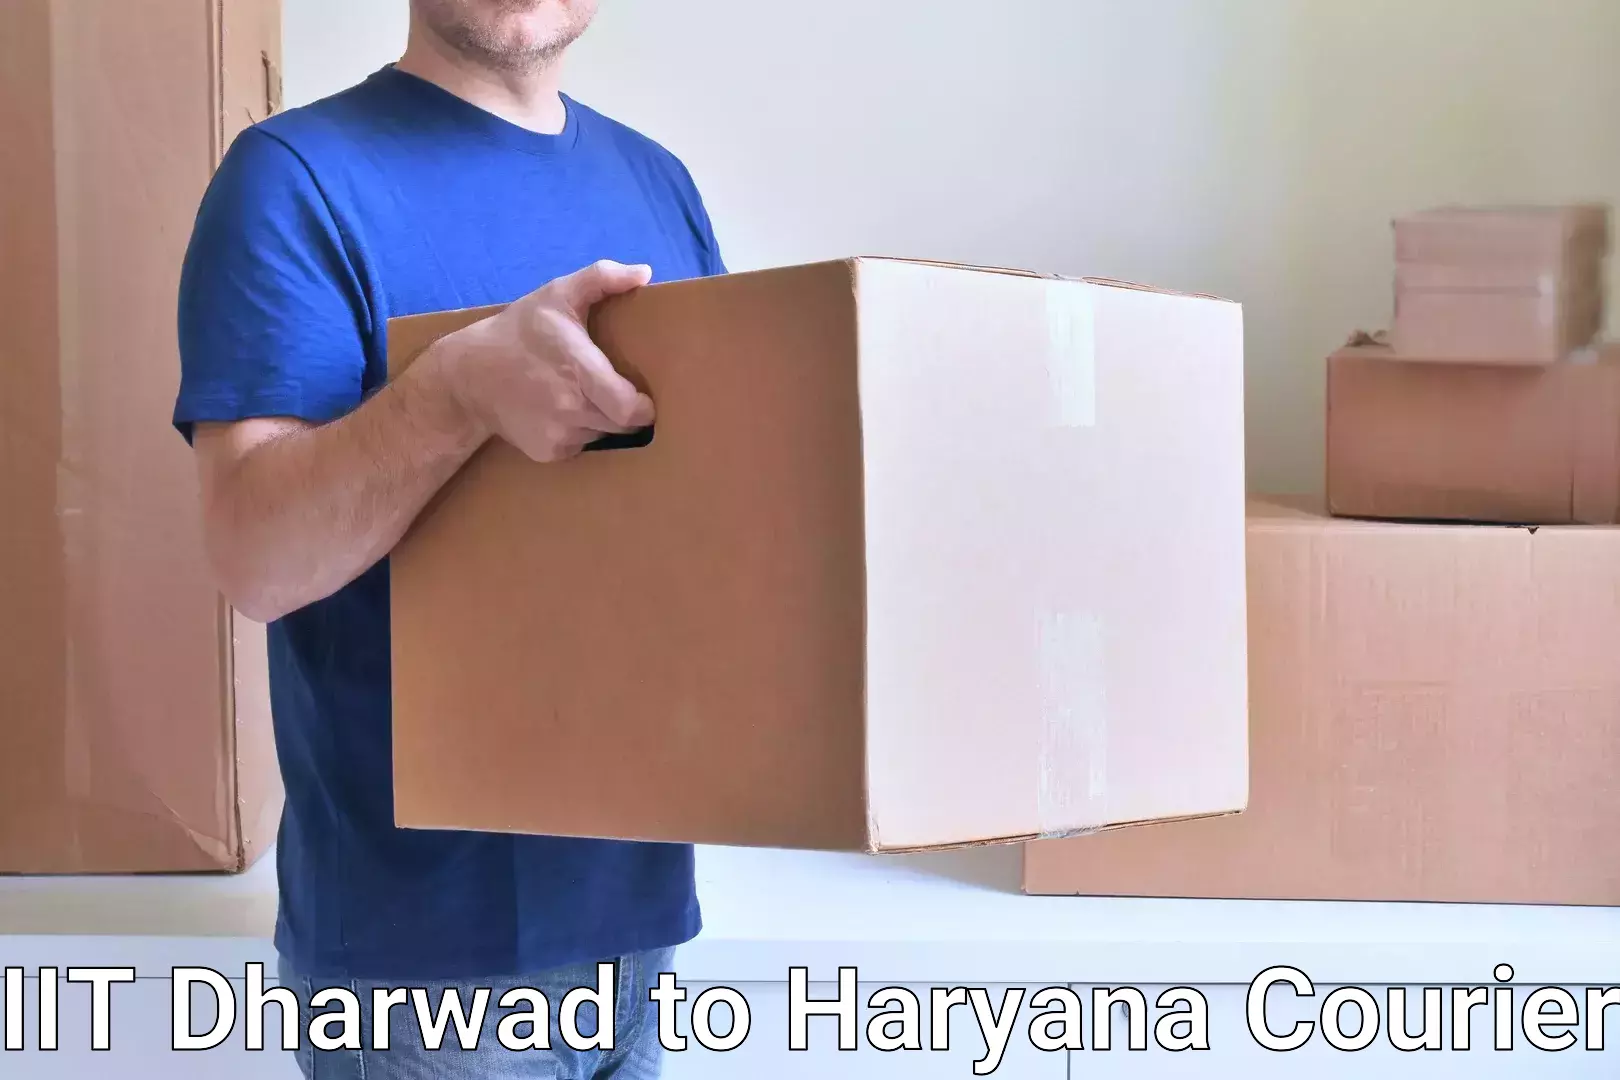 State-of-the-art courier technology IIT Dharwad to Chaudhary Charan Singh Haryana Agricultural University Hisar